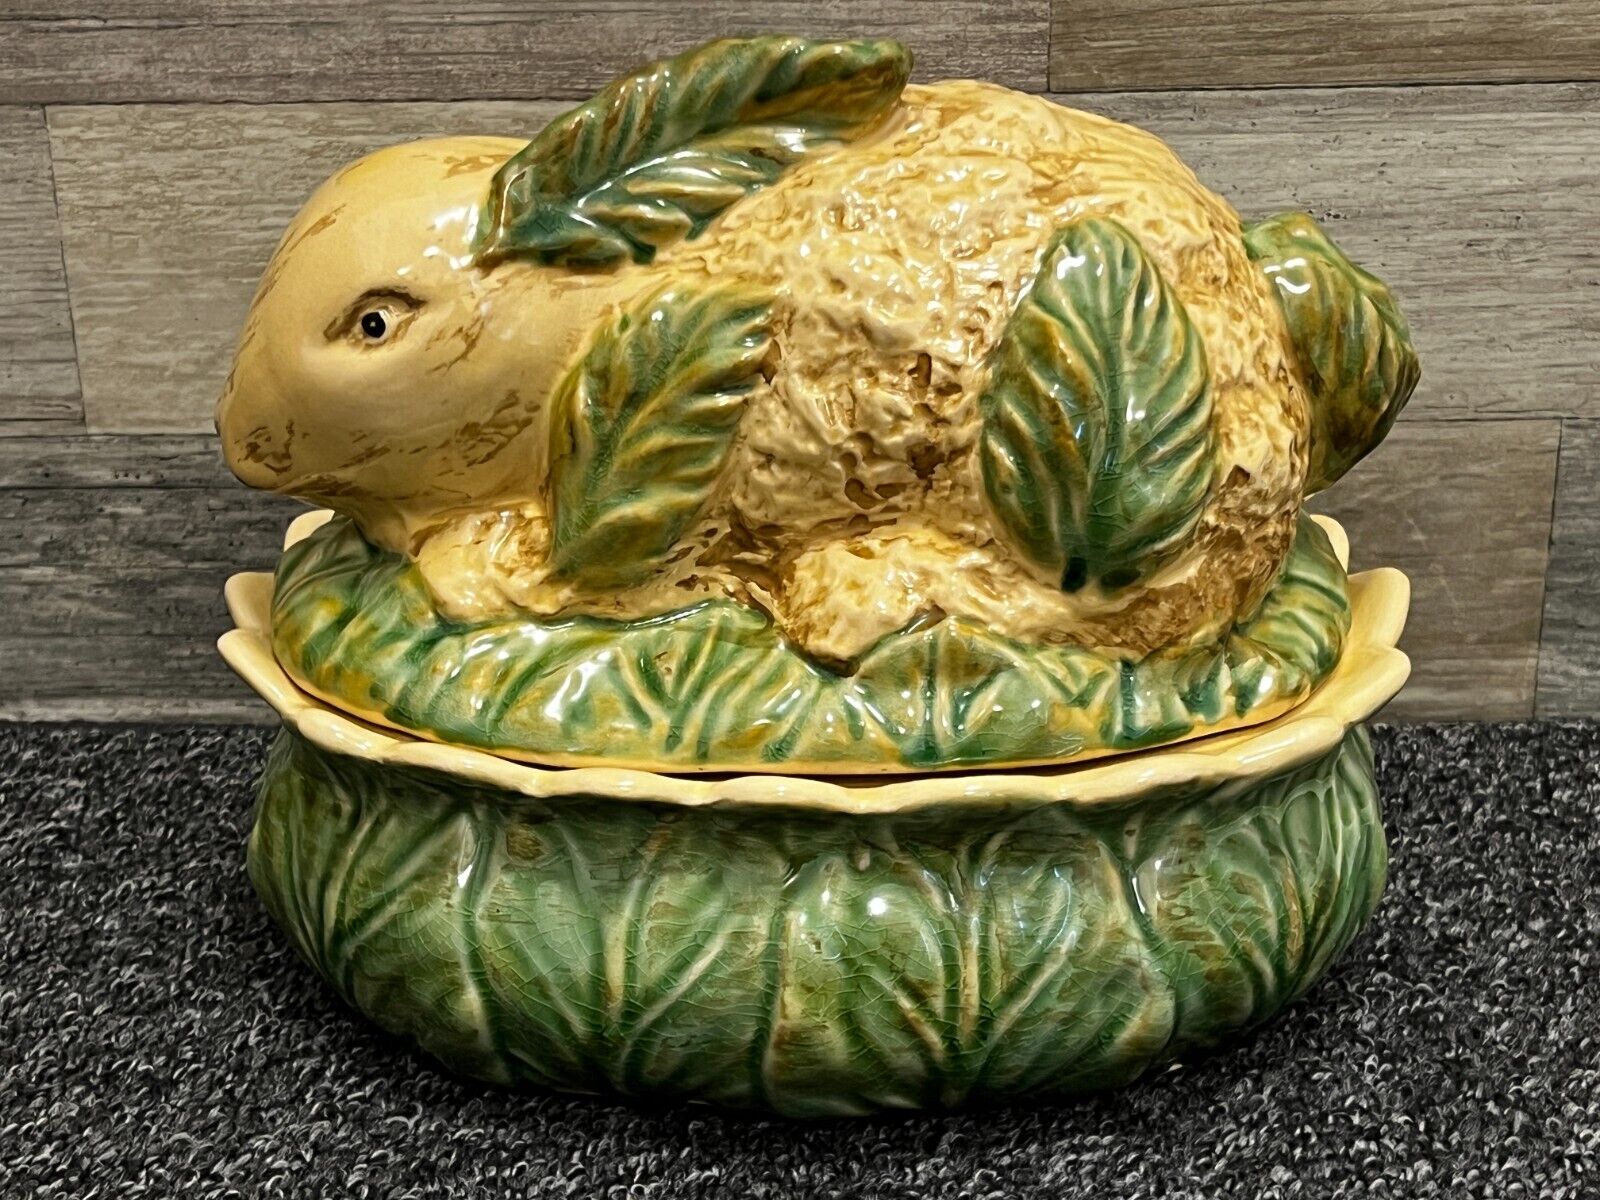 Majolica-Style Bunny Rabbit + Cabbage Leaves Ceramic Covered Dish - Vintage